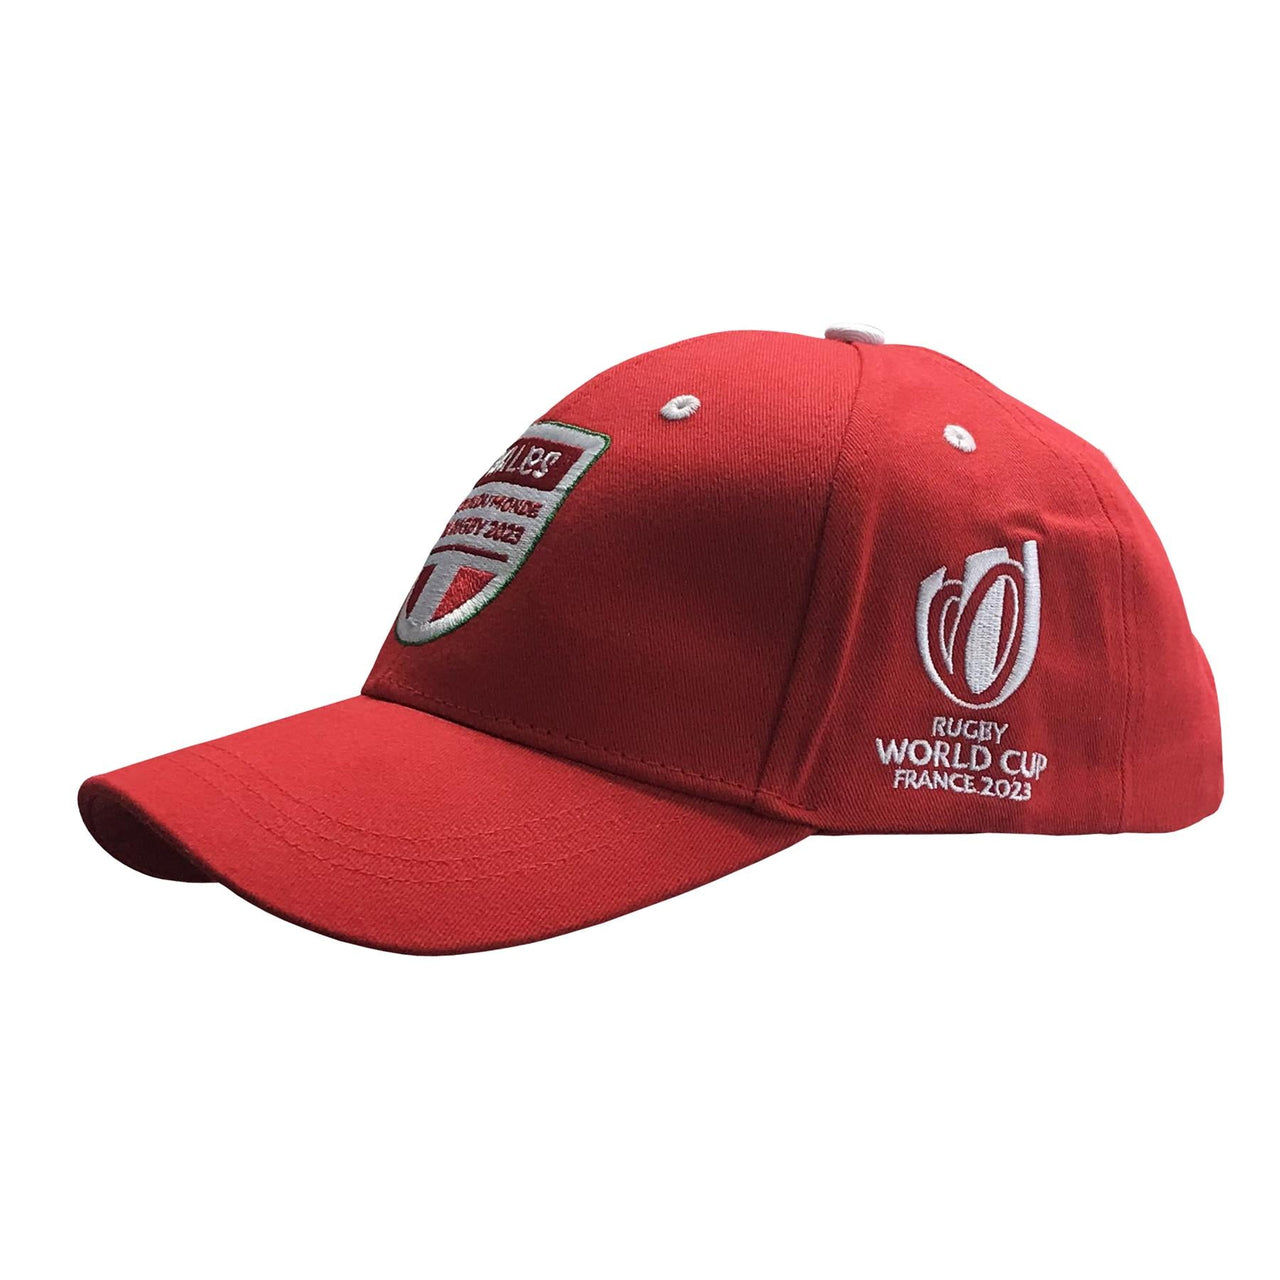 Wales Rugby World Cup 2023 Baseball Cap